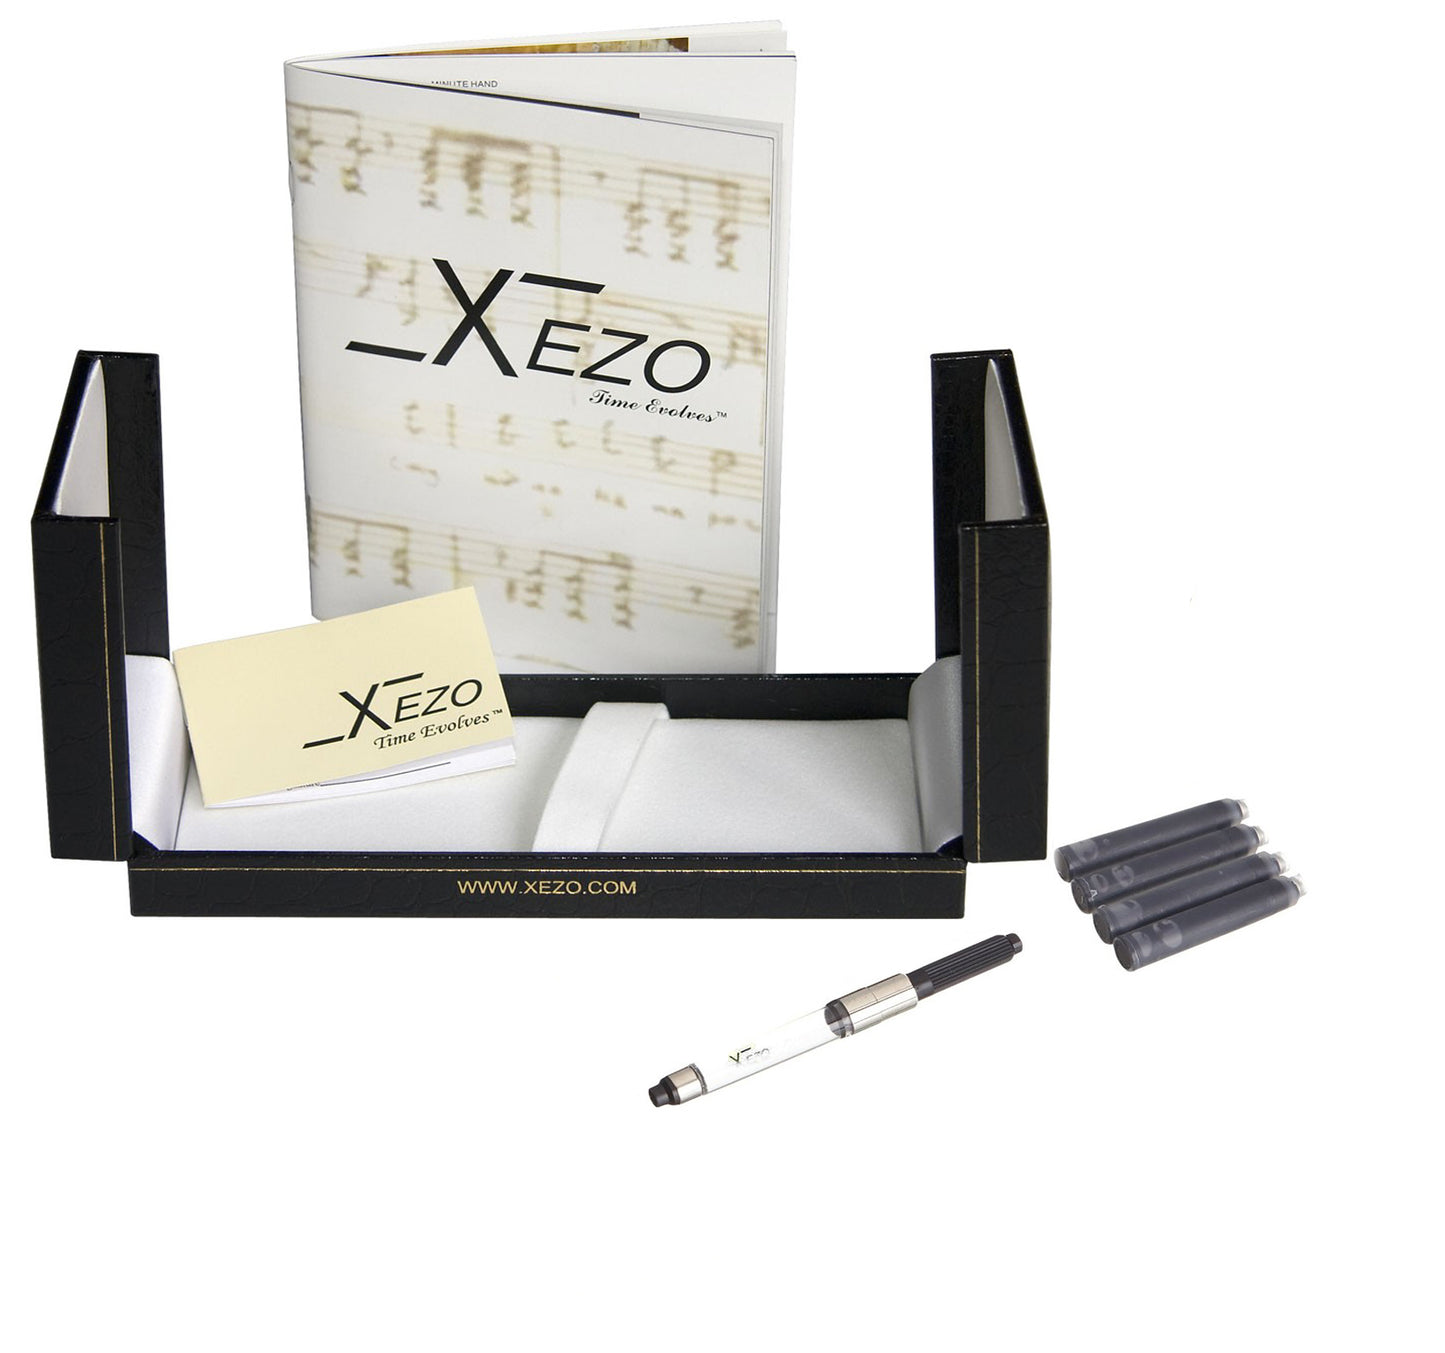 Xezo - Black gift box, certificate, manual, chrome-plated ink converter, and four ink cartridges of the Incognito Zinc F-2 fountain pen